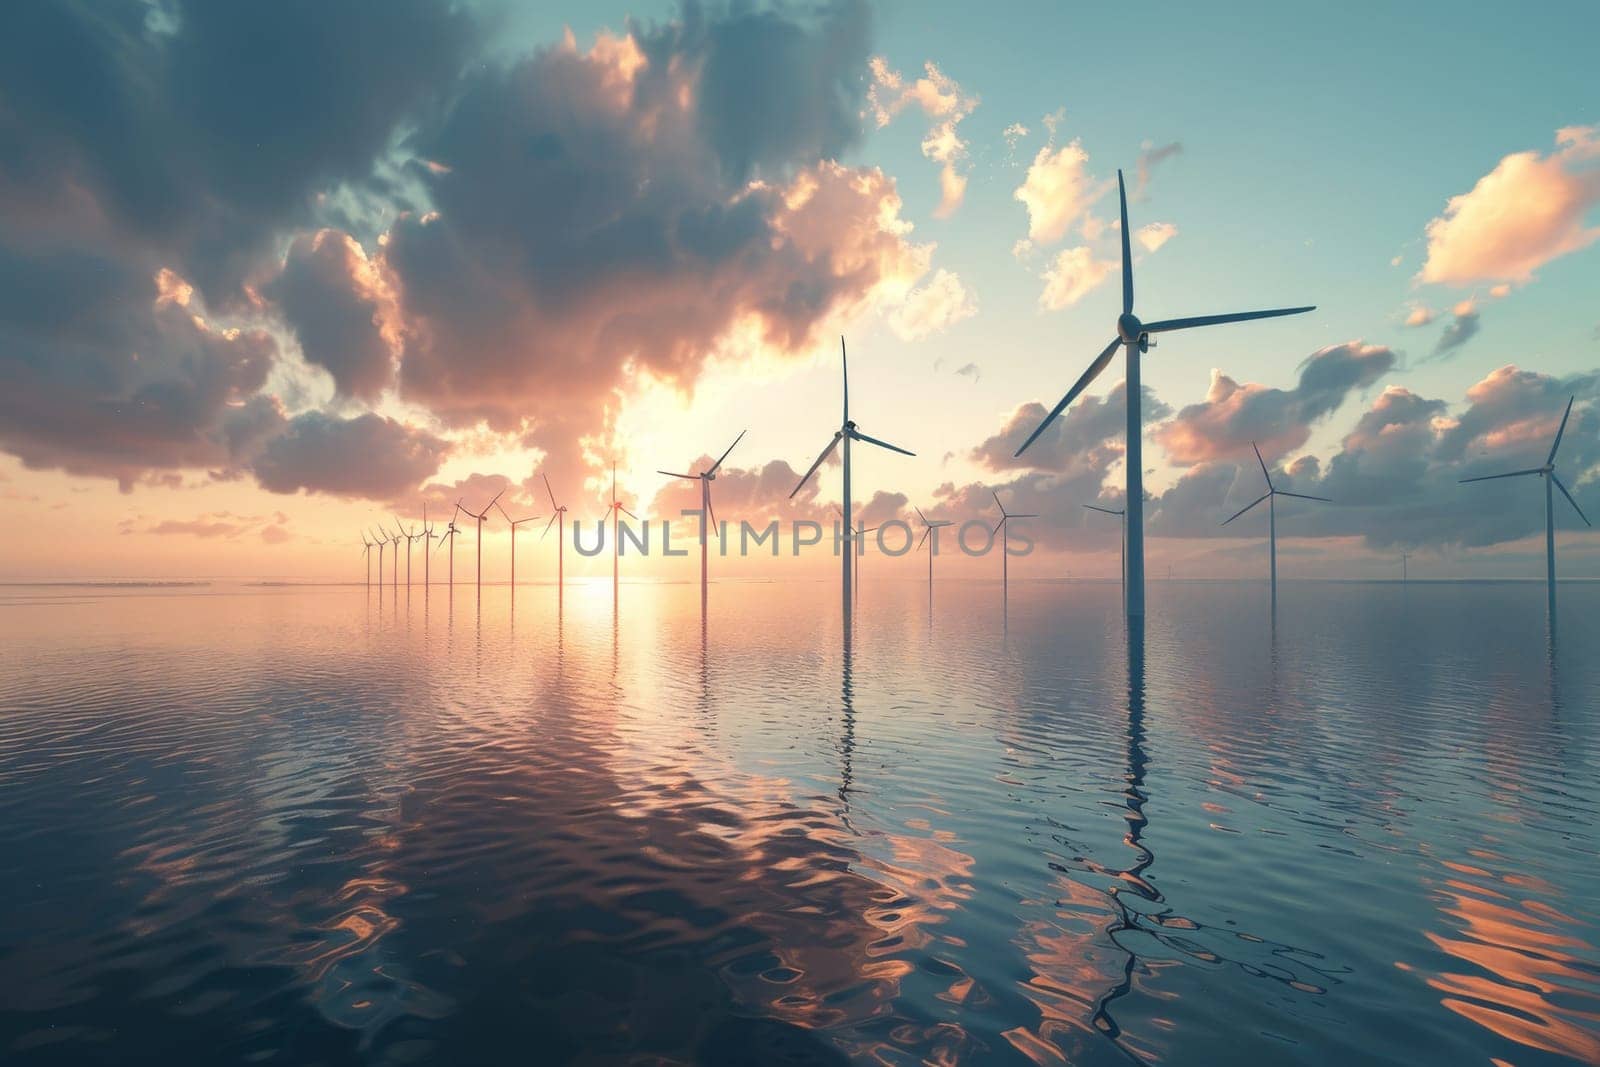 A large group of wind turbines are in the water, with the sun setting in the background. The scene is serene and peaceful, with the turbines standing tall and proud in the water